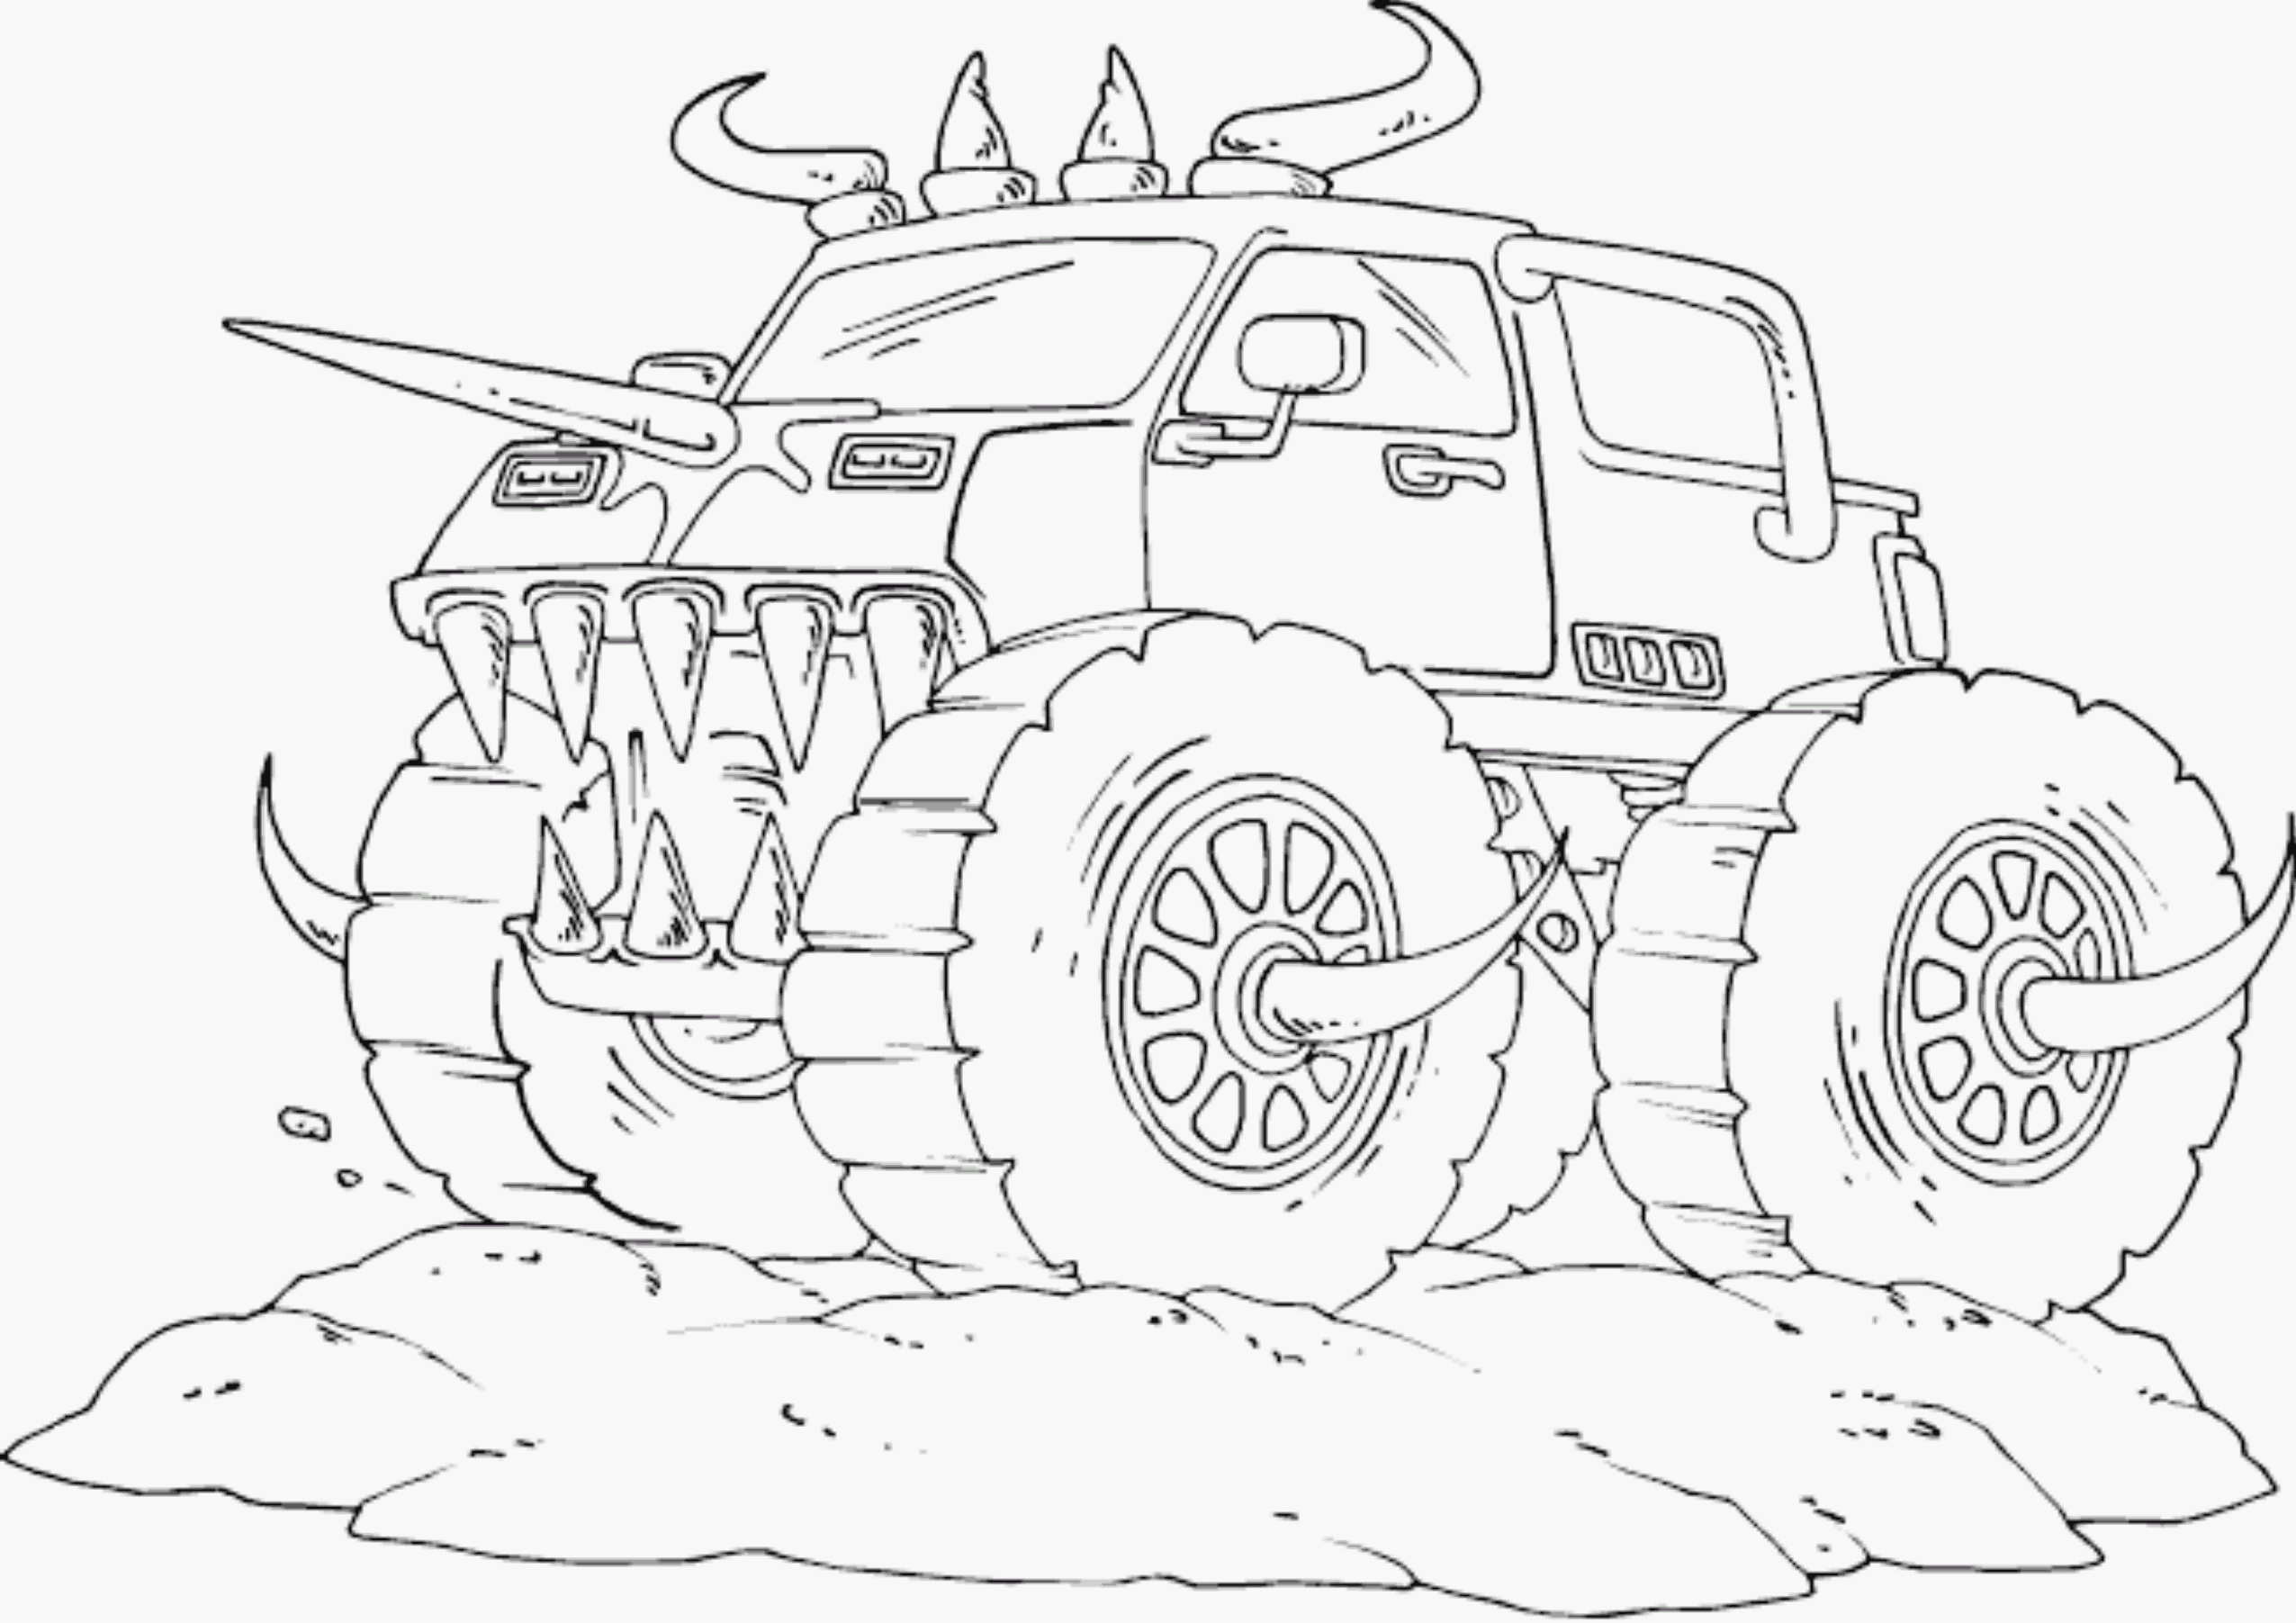 real-monster-truck-coloring-pages | | BestAppsForKids.com